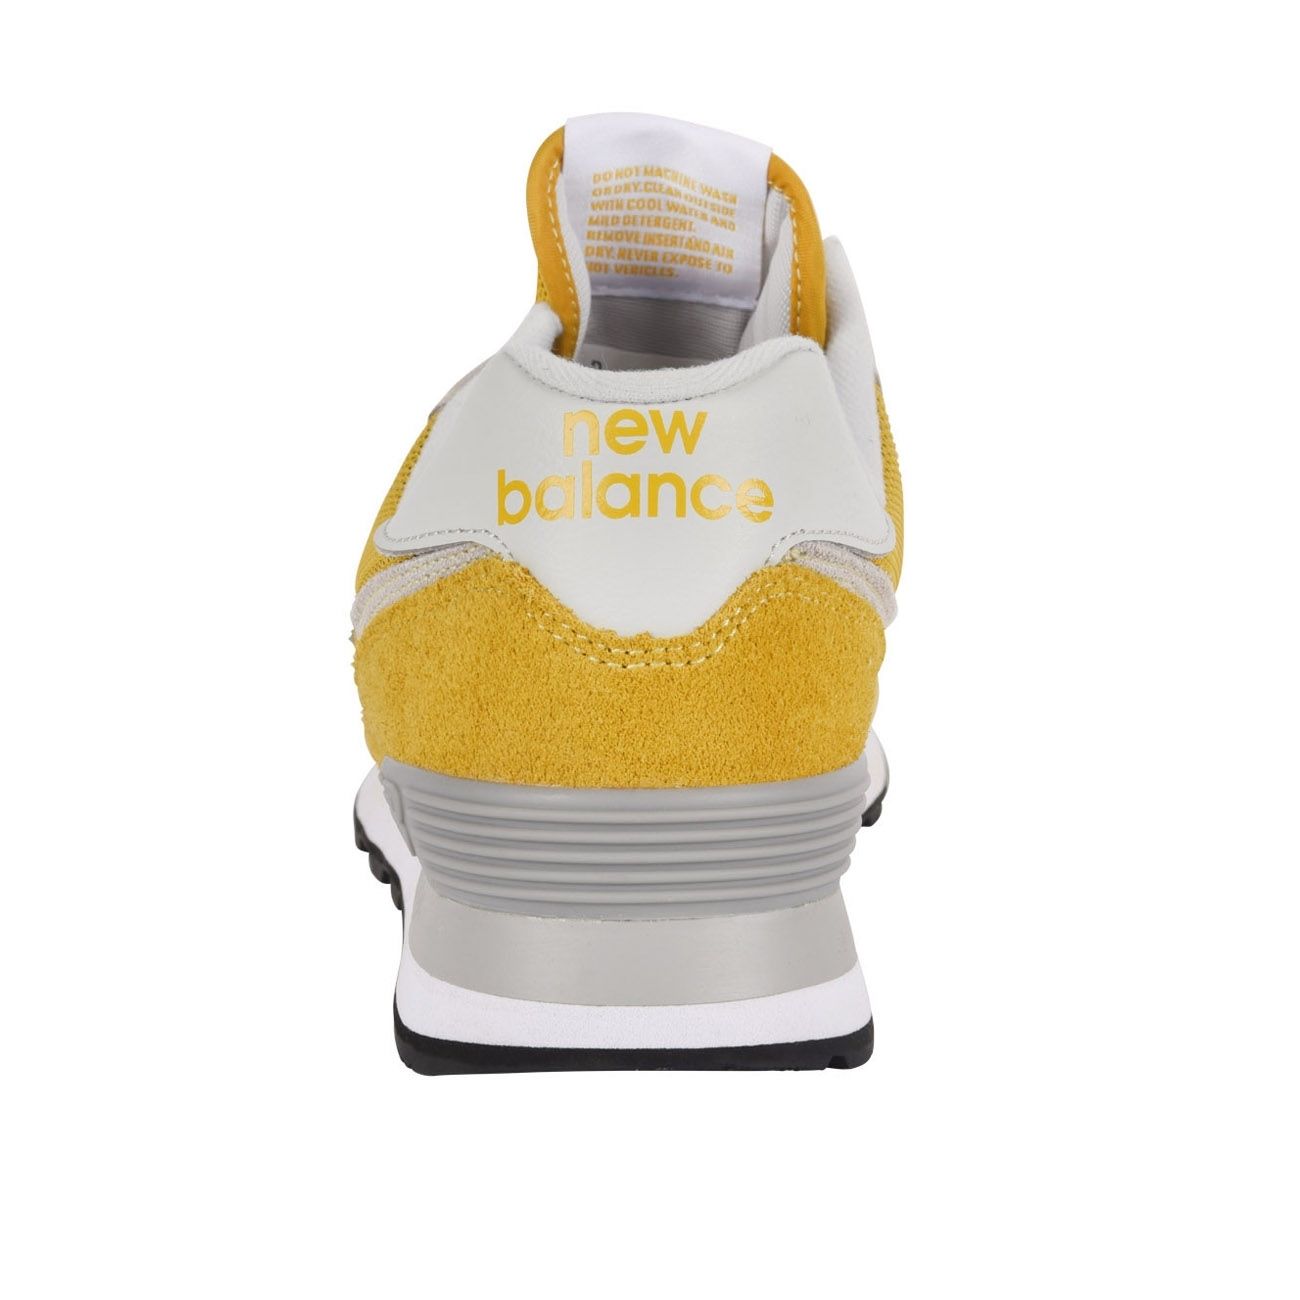 NEW BALANCE SNEAKERS 574 LIFESTYLE SUEDE MESH Uomo Gold yellow ...